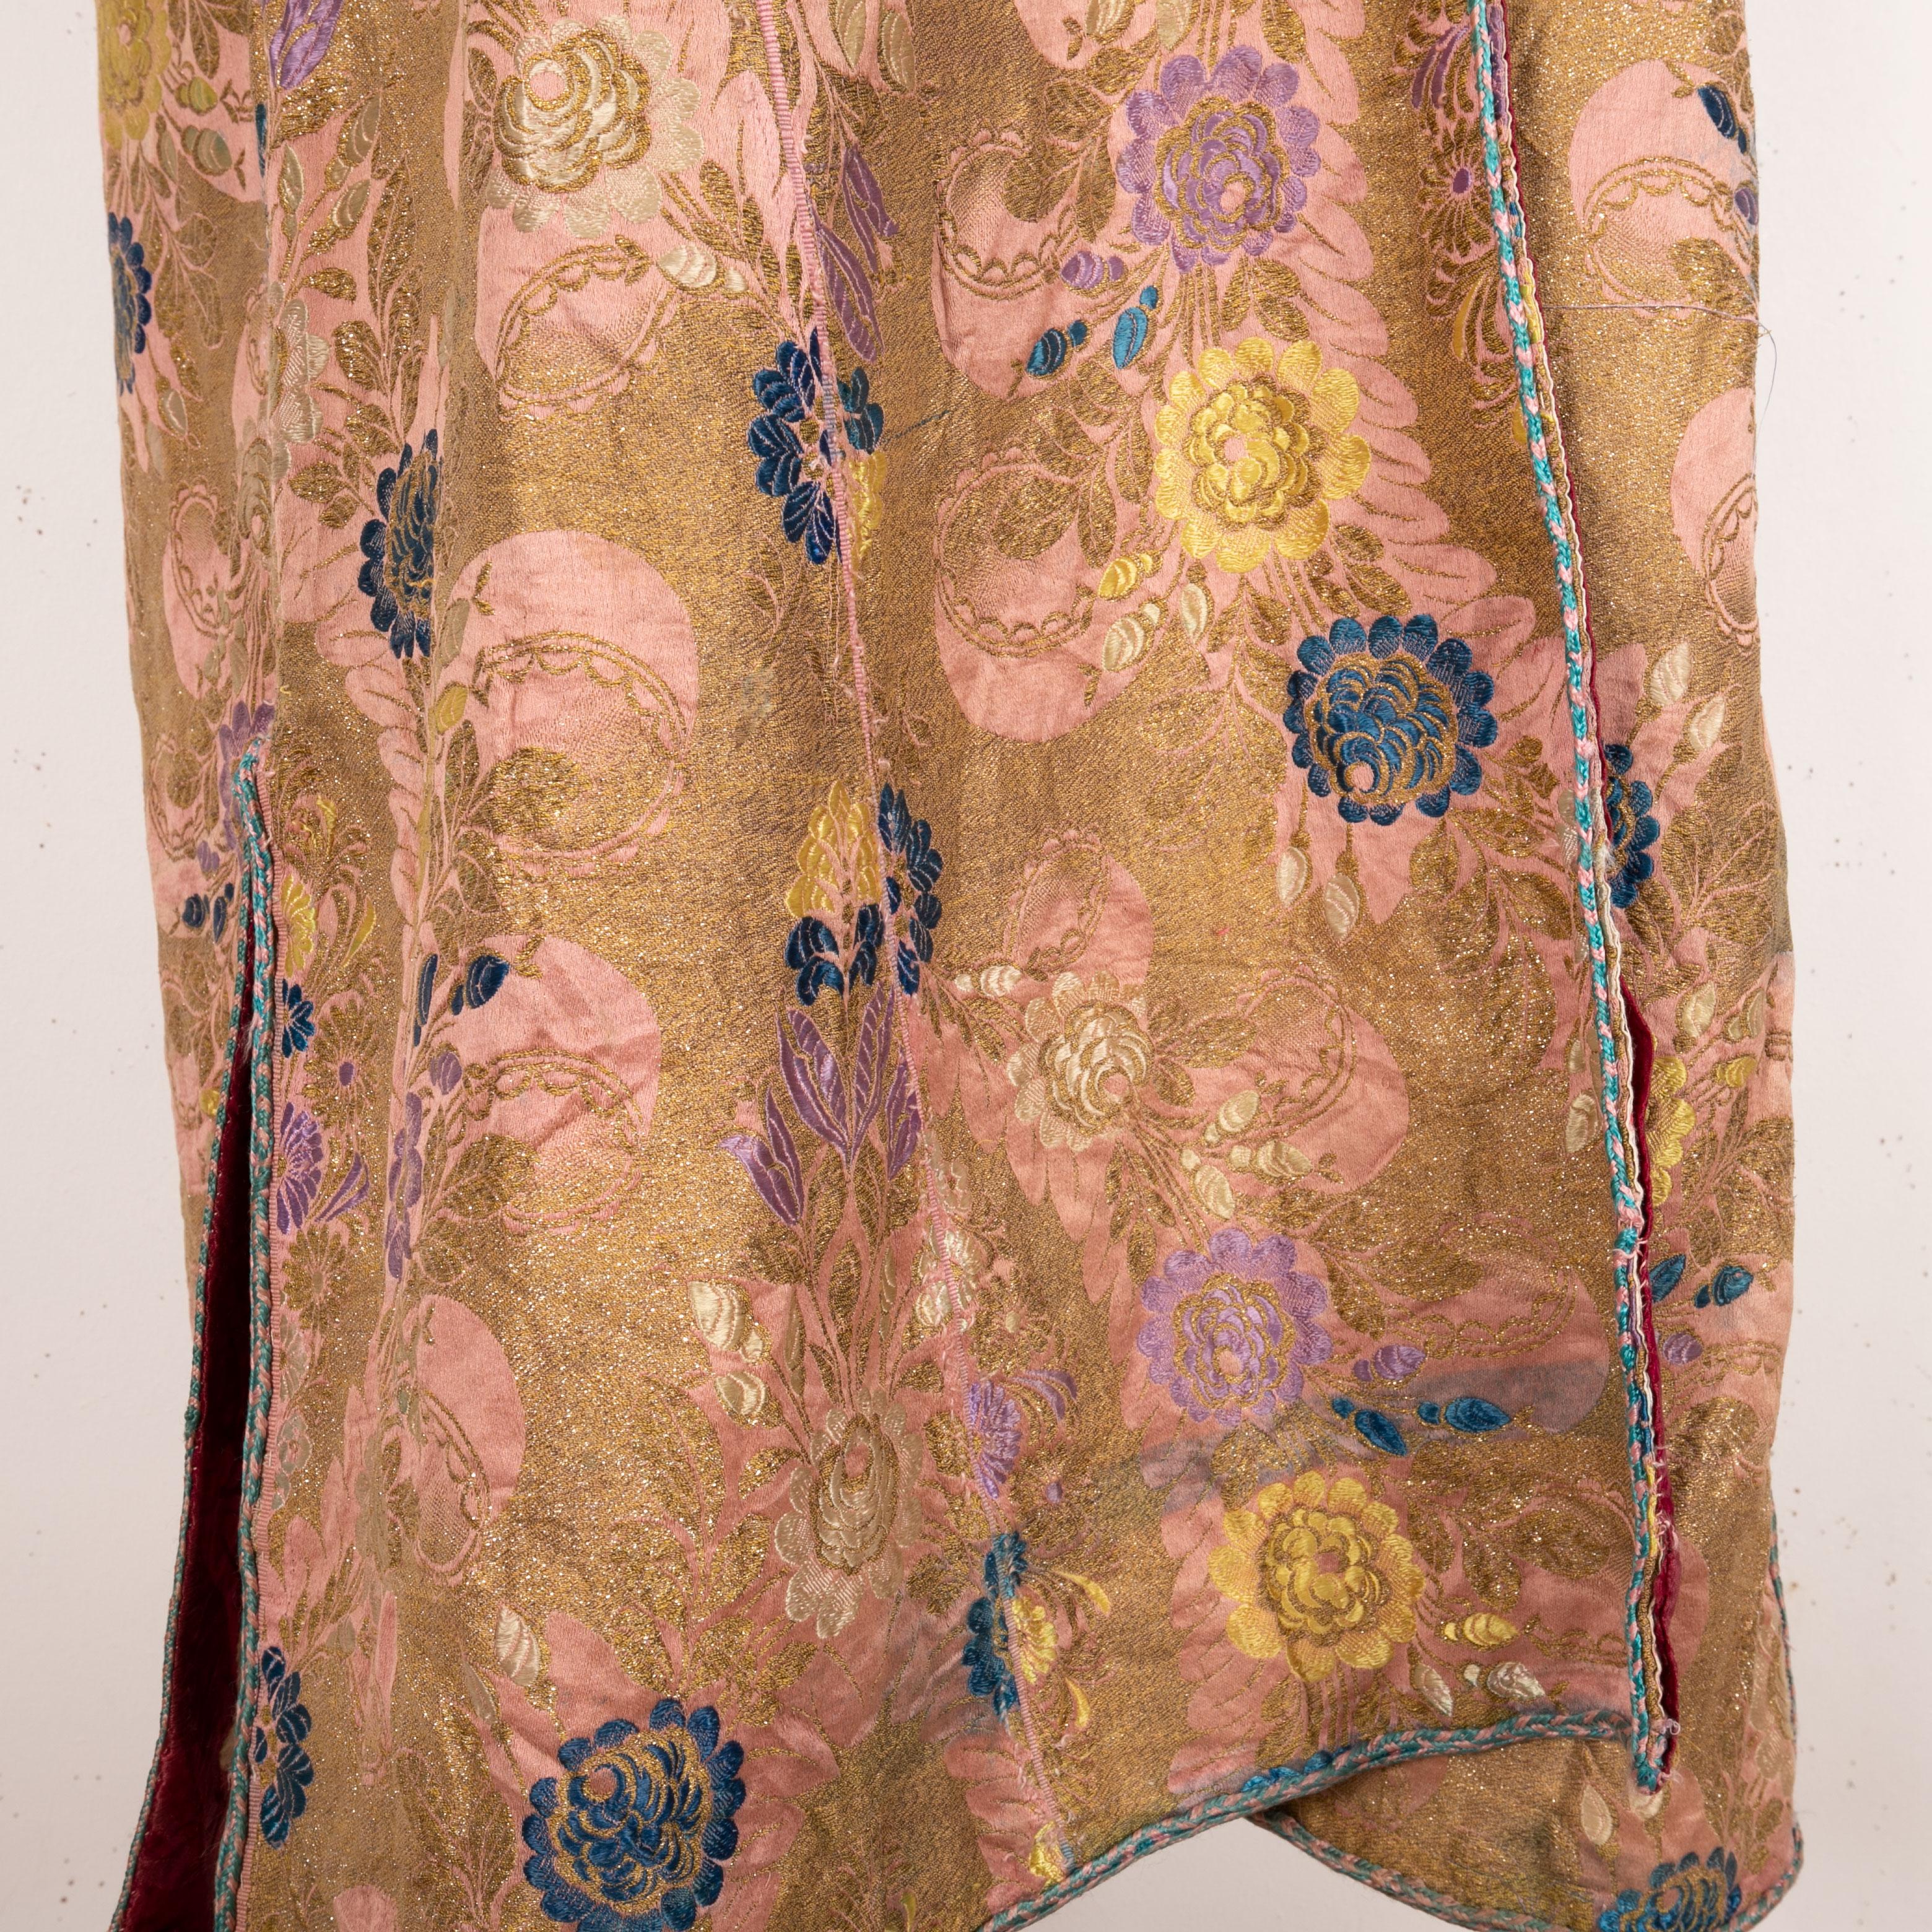 Woven Antique Brocaded Moroccan Kaftan, Early 20th Century